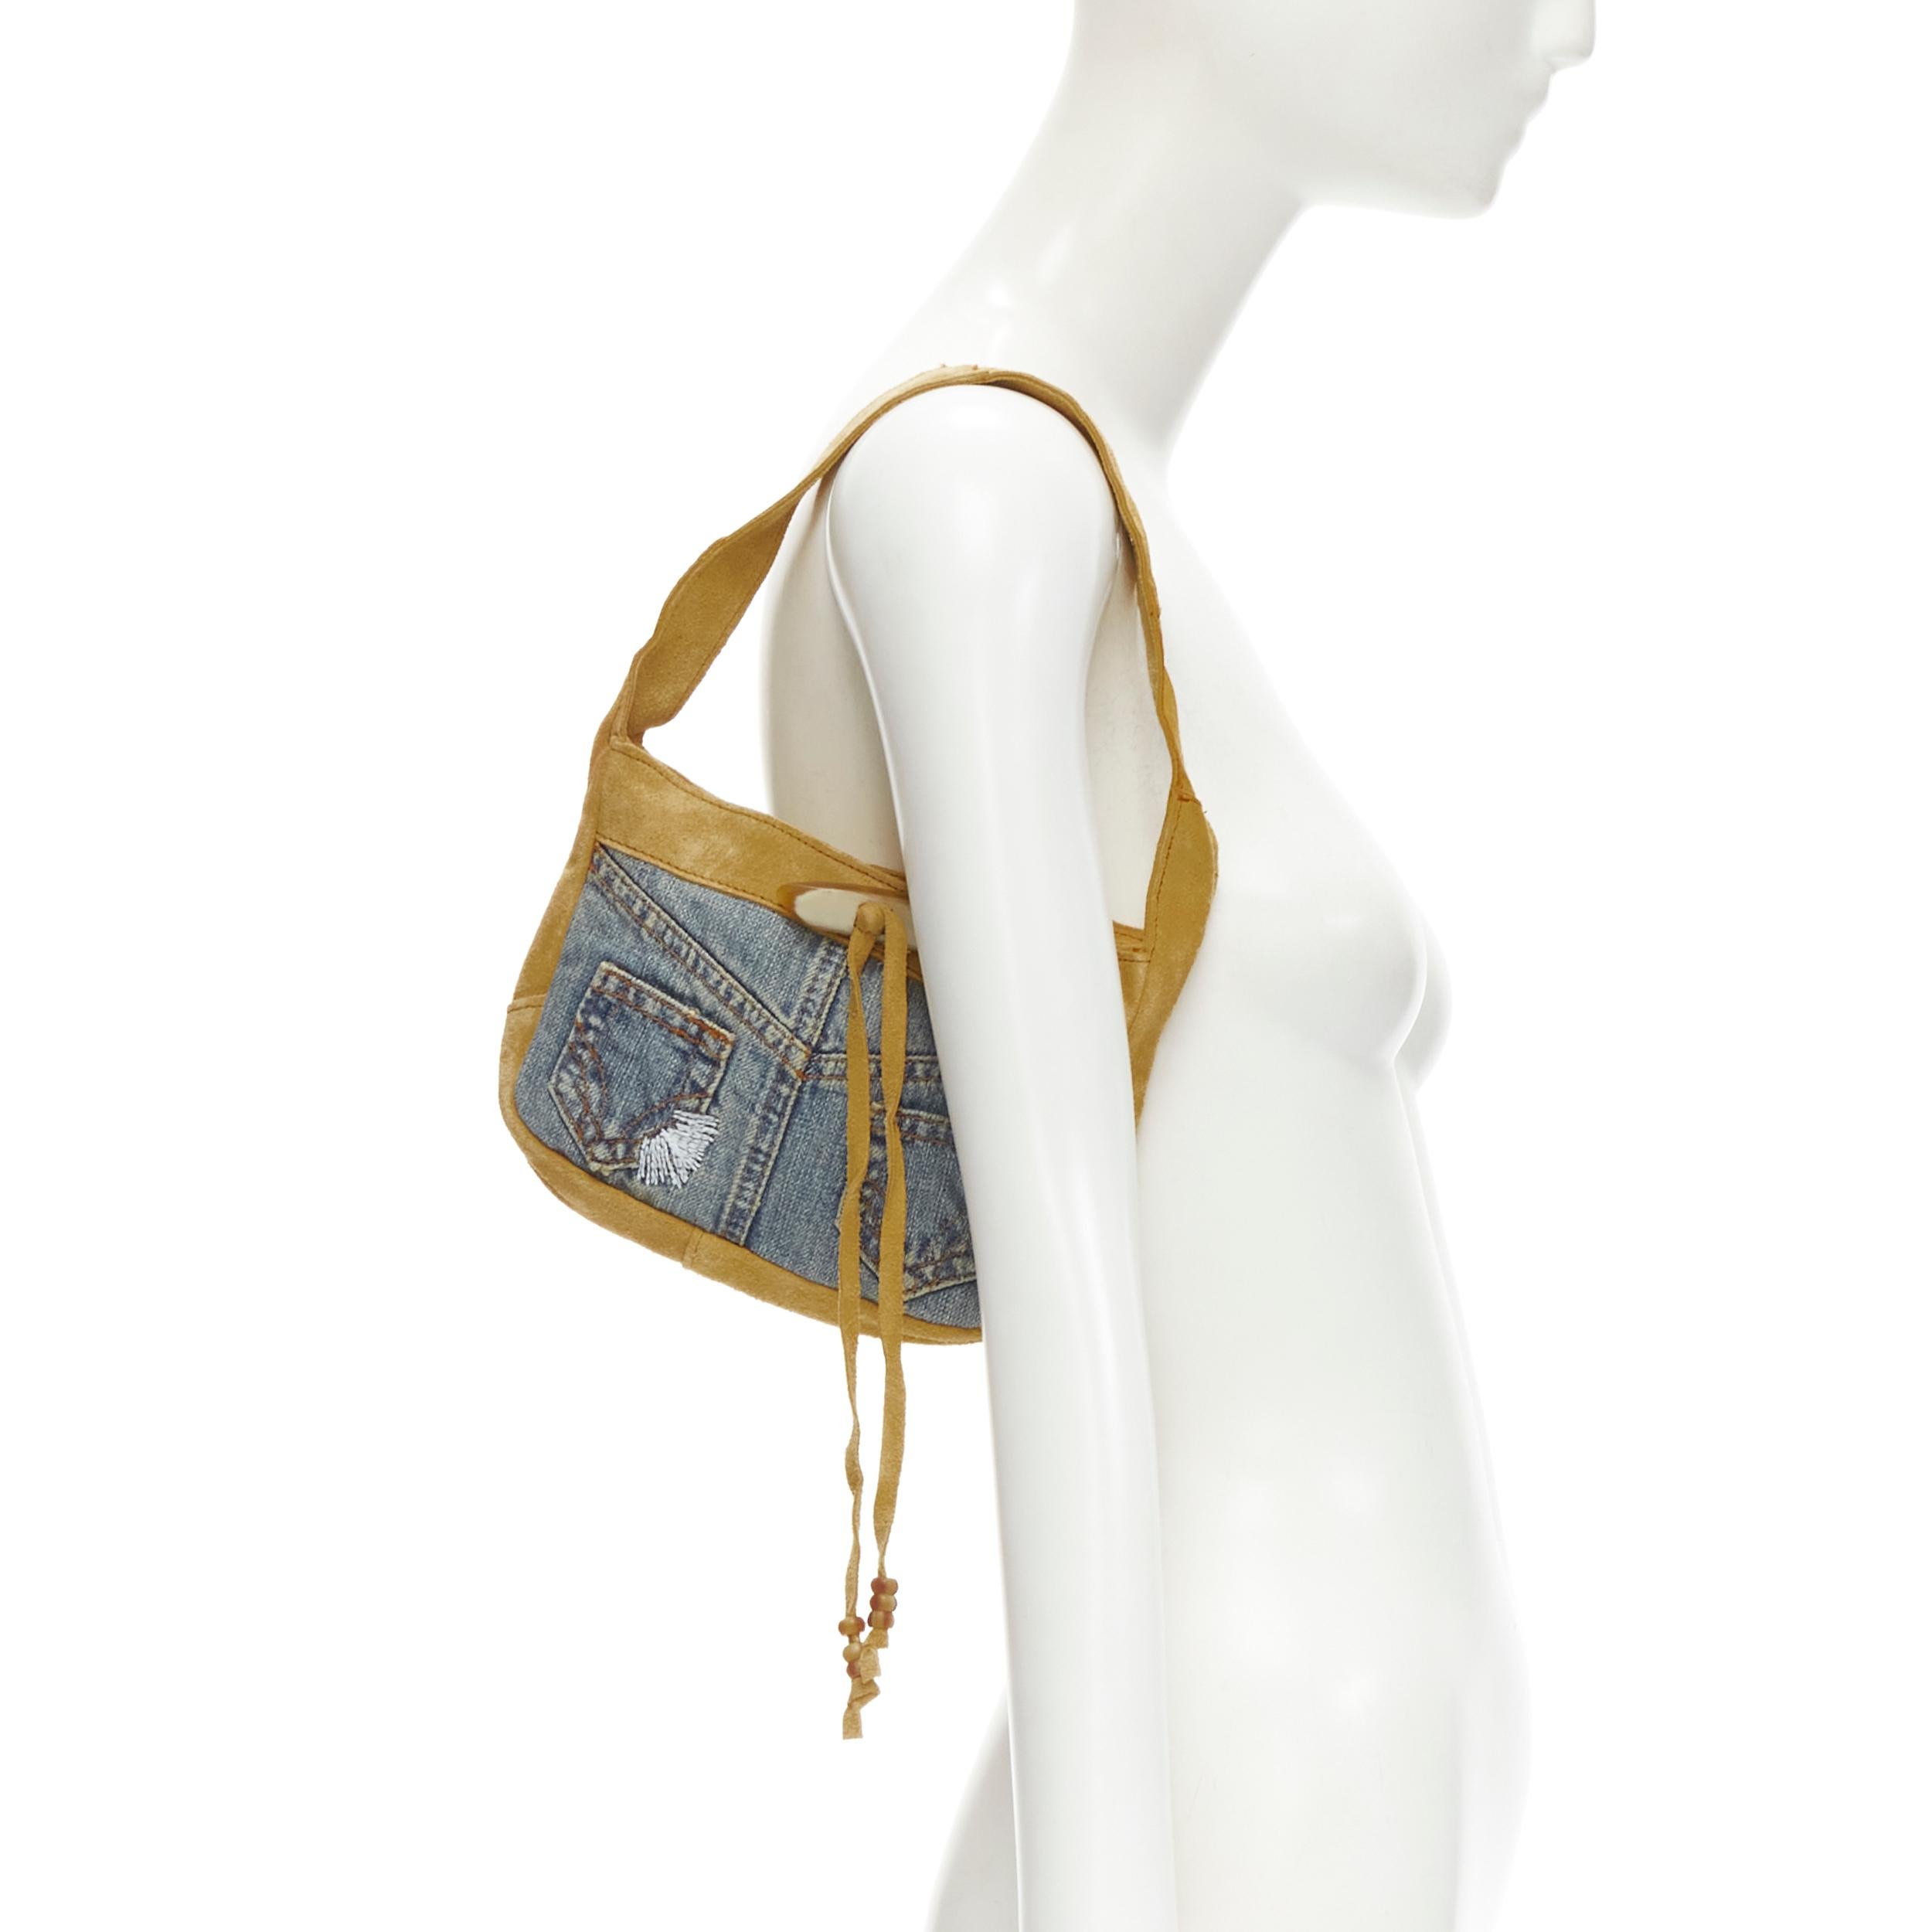 D&G DOLCE GABBANA Vintage Y2K distressed denim suede mini shoulder bag
Brand: D&G
Designer: Domenico Dolce and Stefano Gabbana
Material: Suede
Color: Blue
Pattern: Solid
Closure: Magnet
Made in: Italy

CONDITION:
Condition: Fair, this item was